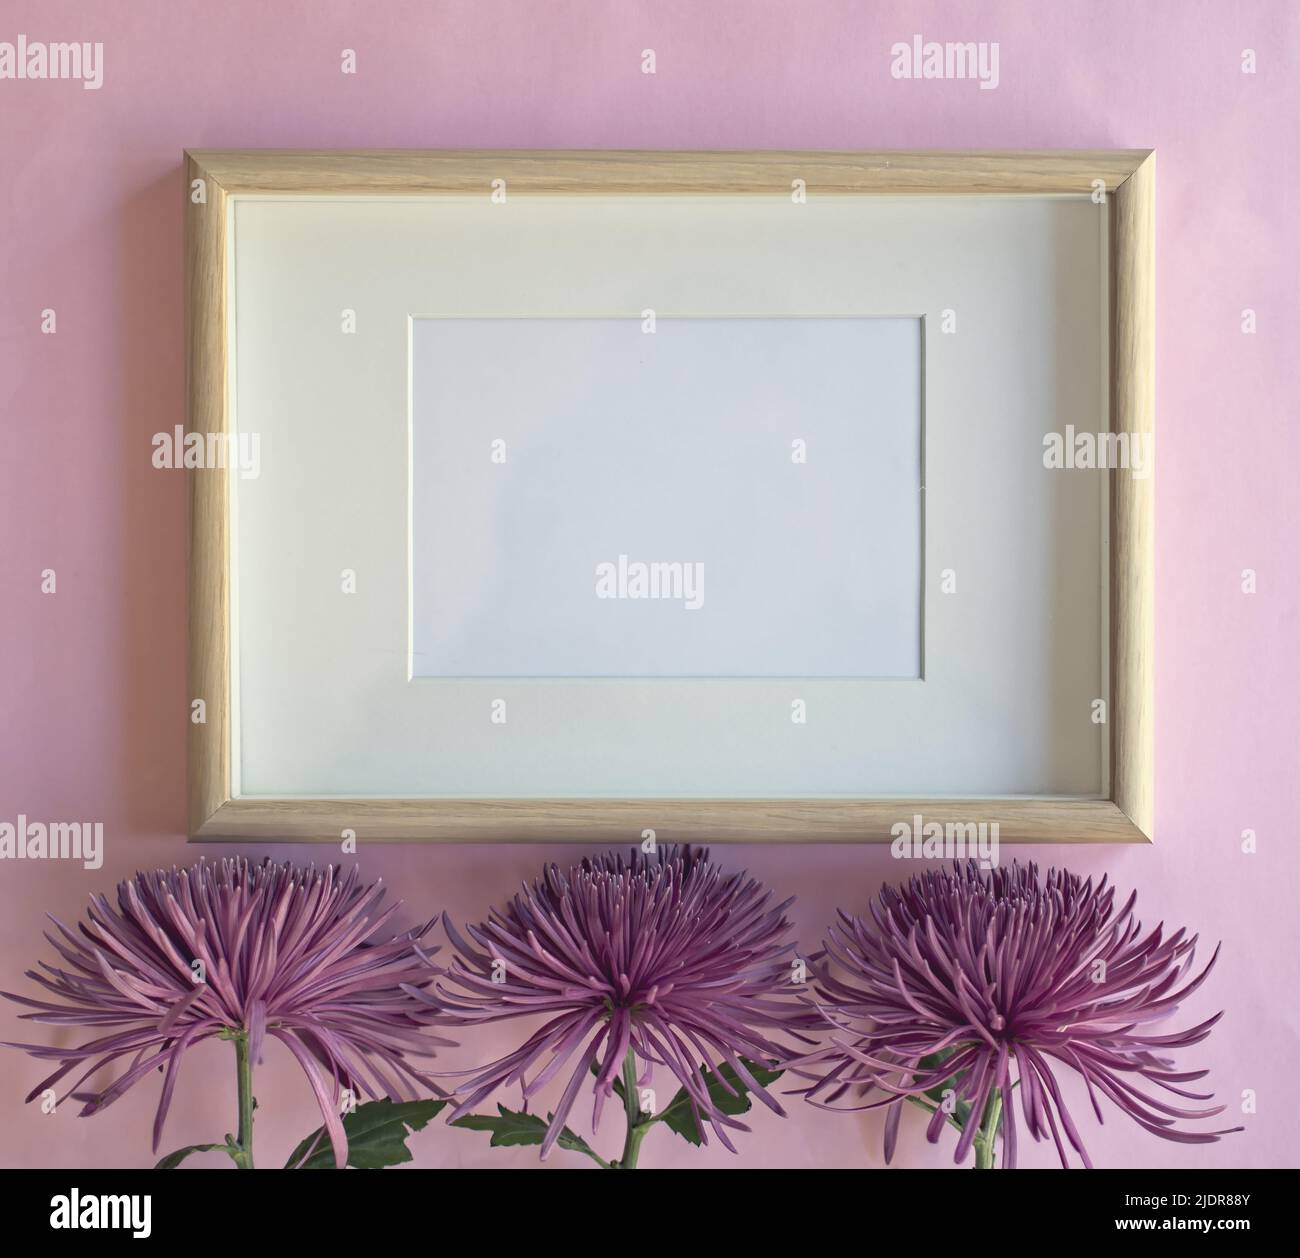 Mockup frame with chrysanthemum flowers on pink background. Stock Photo